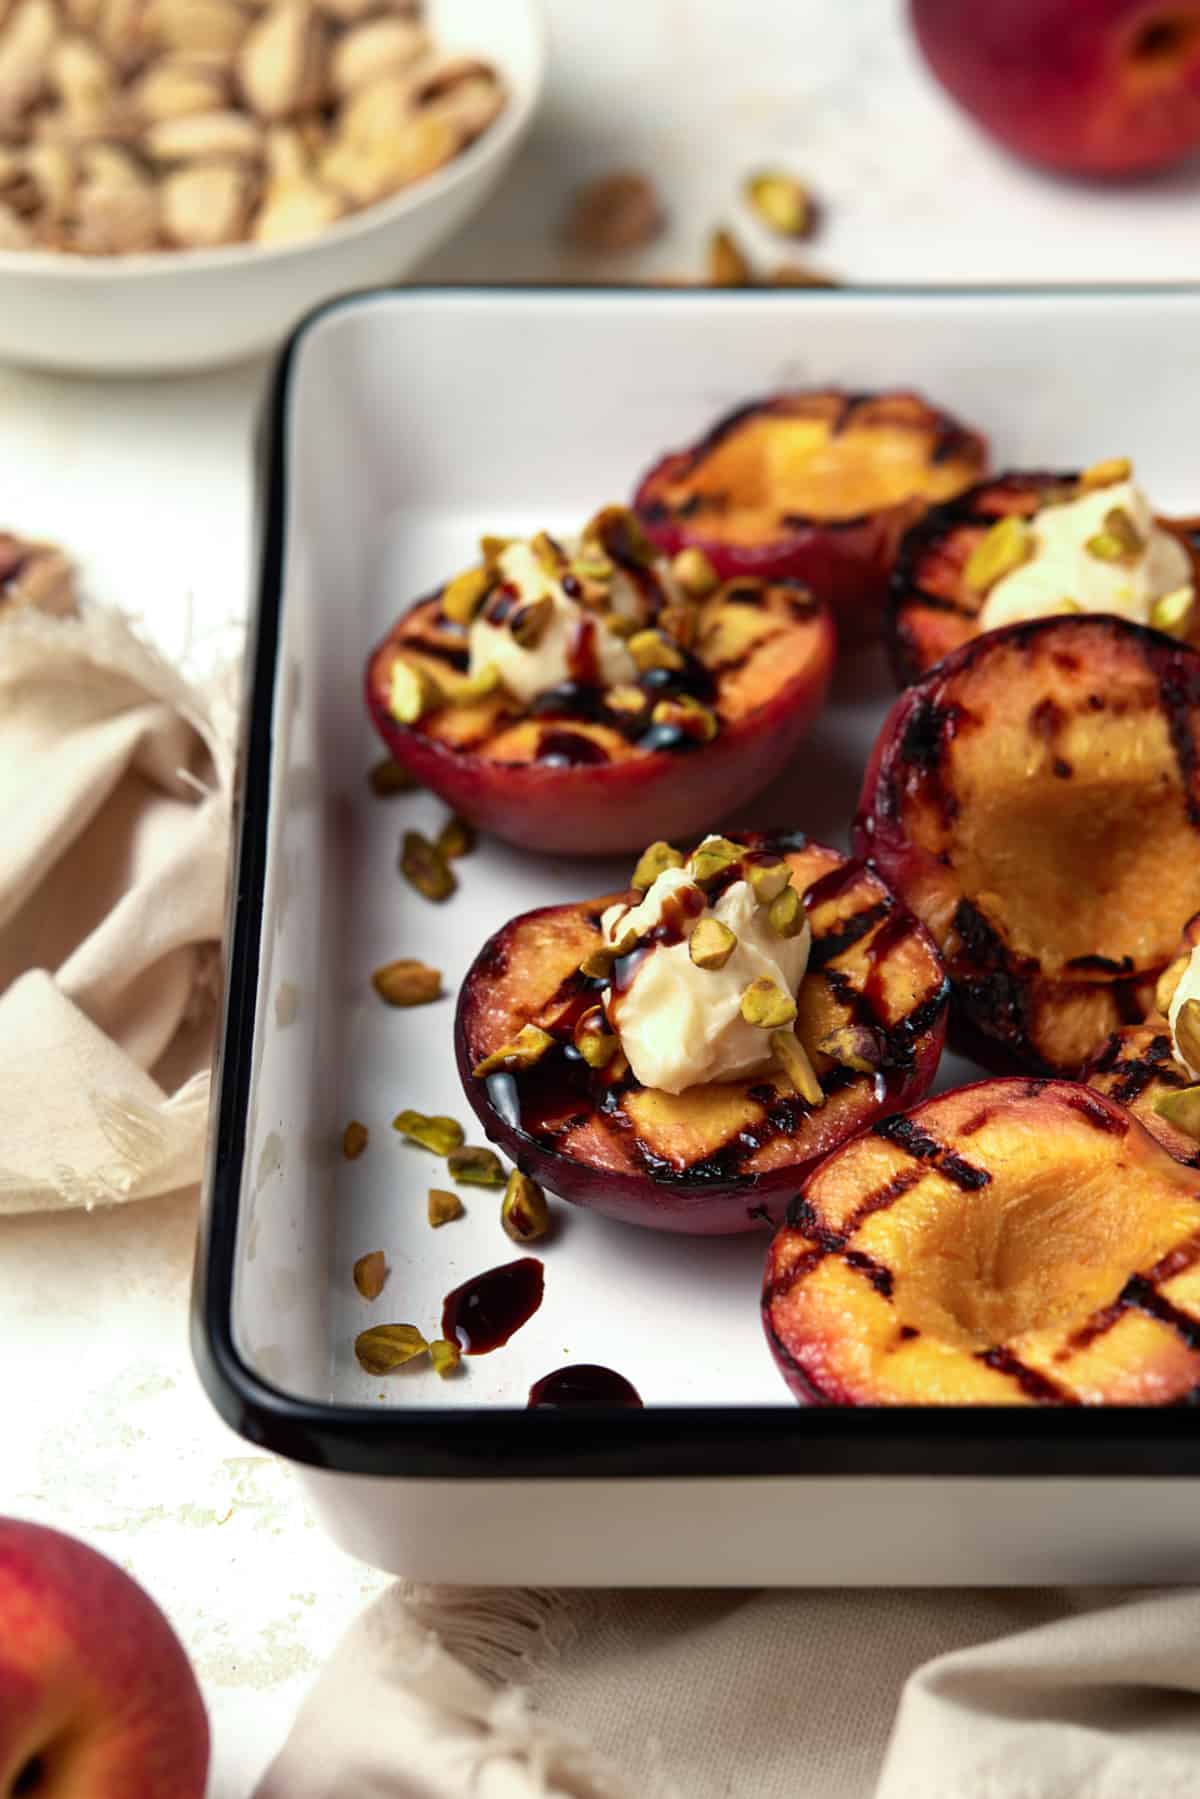 Grilled peach halves in a white enamel tray drizzled with balsamic glaze. 